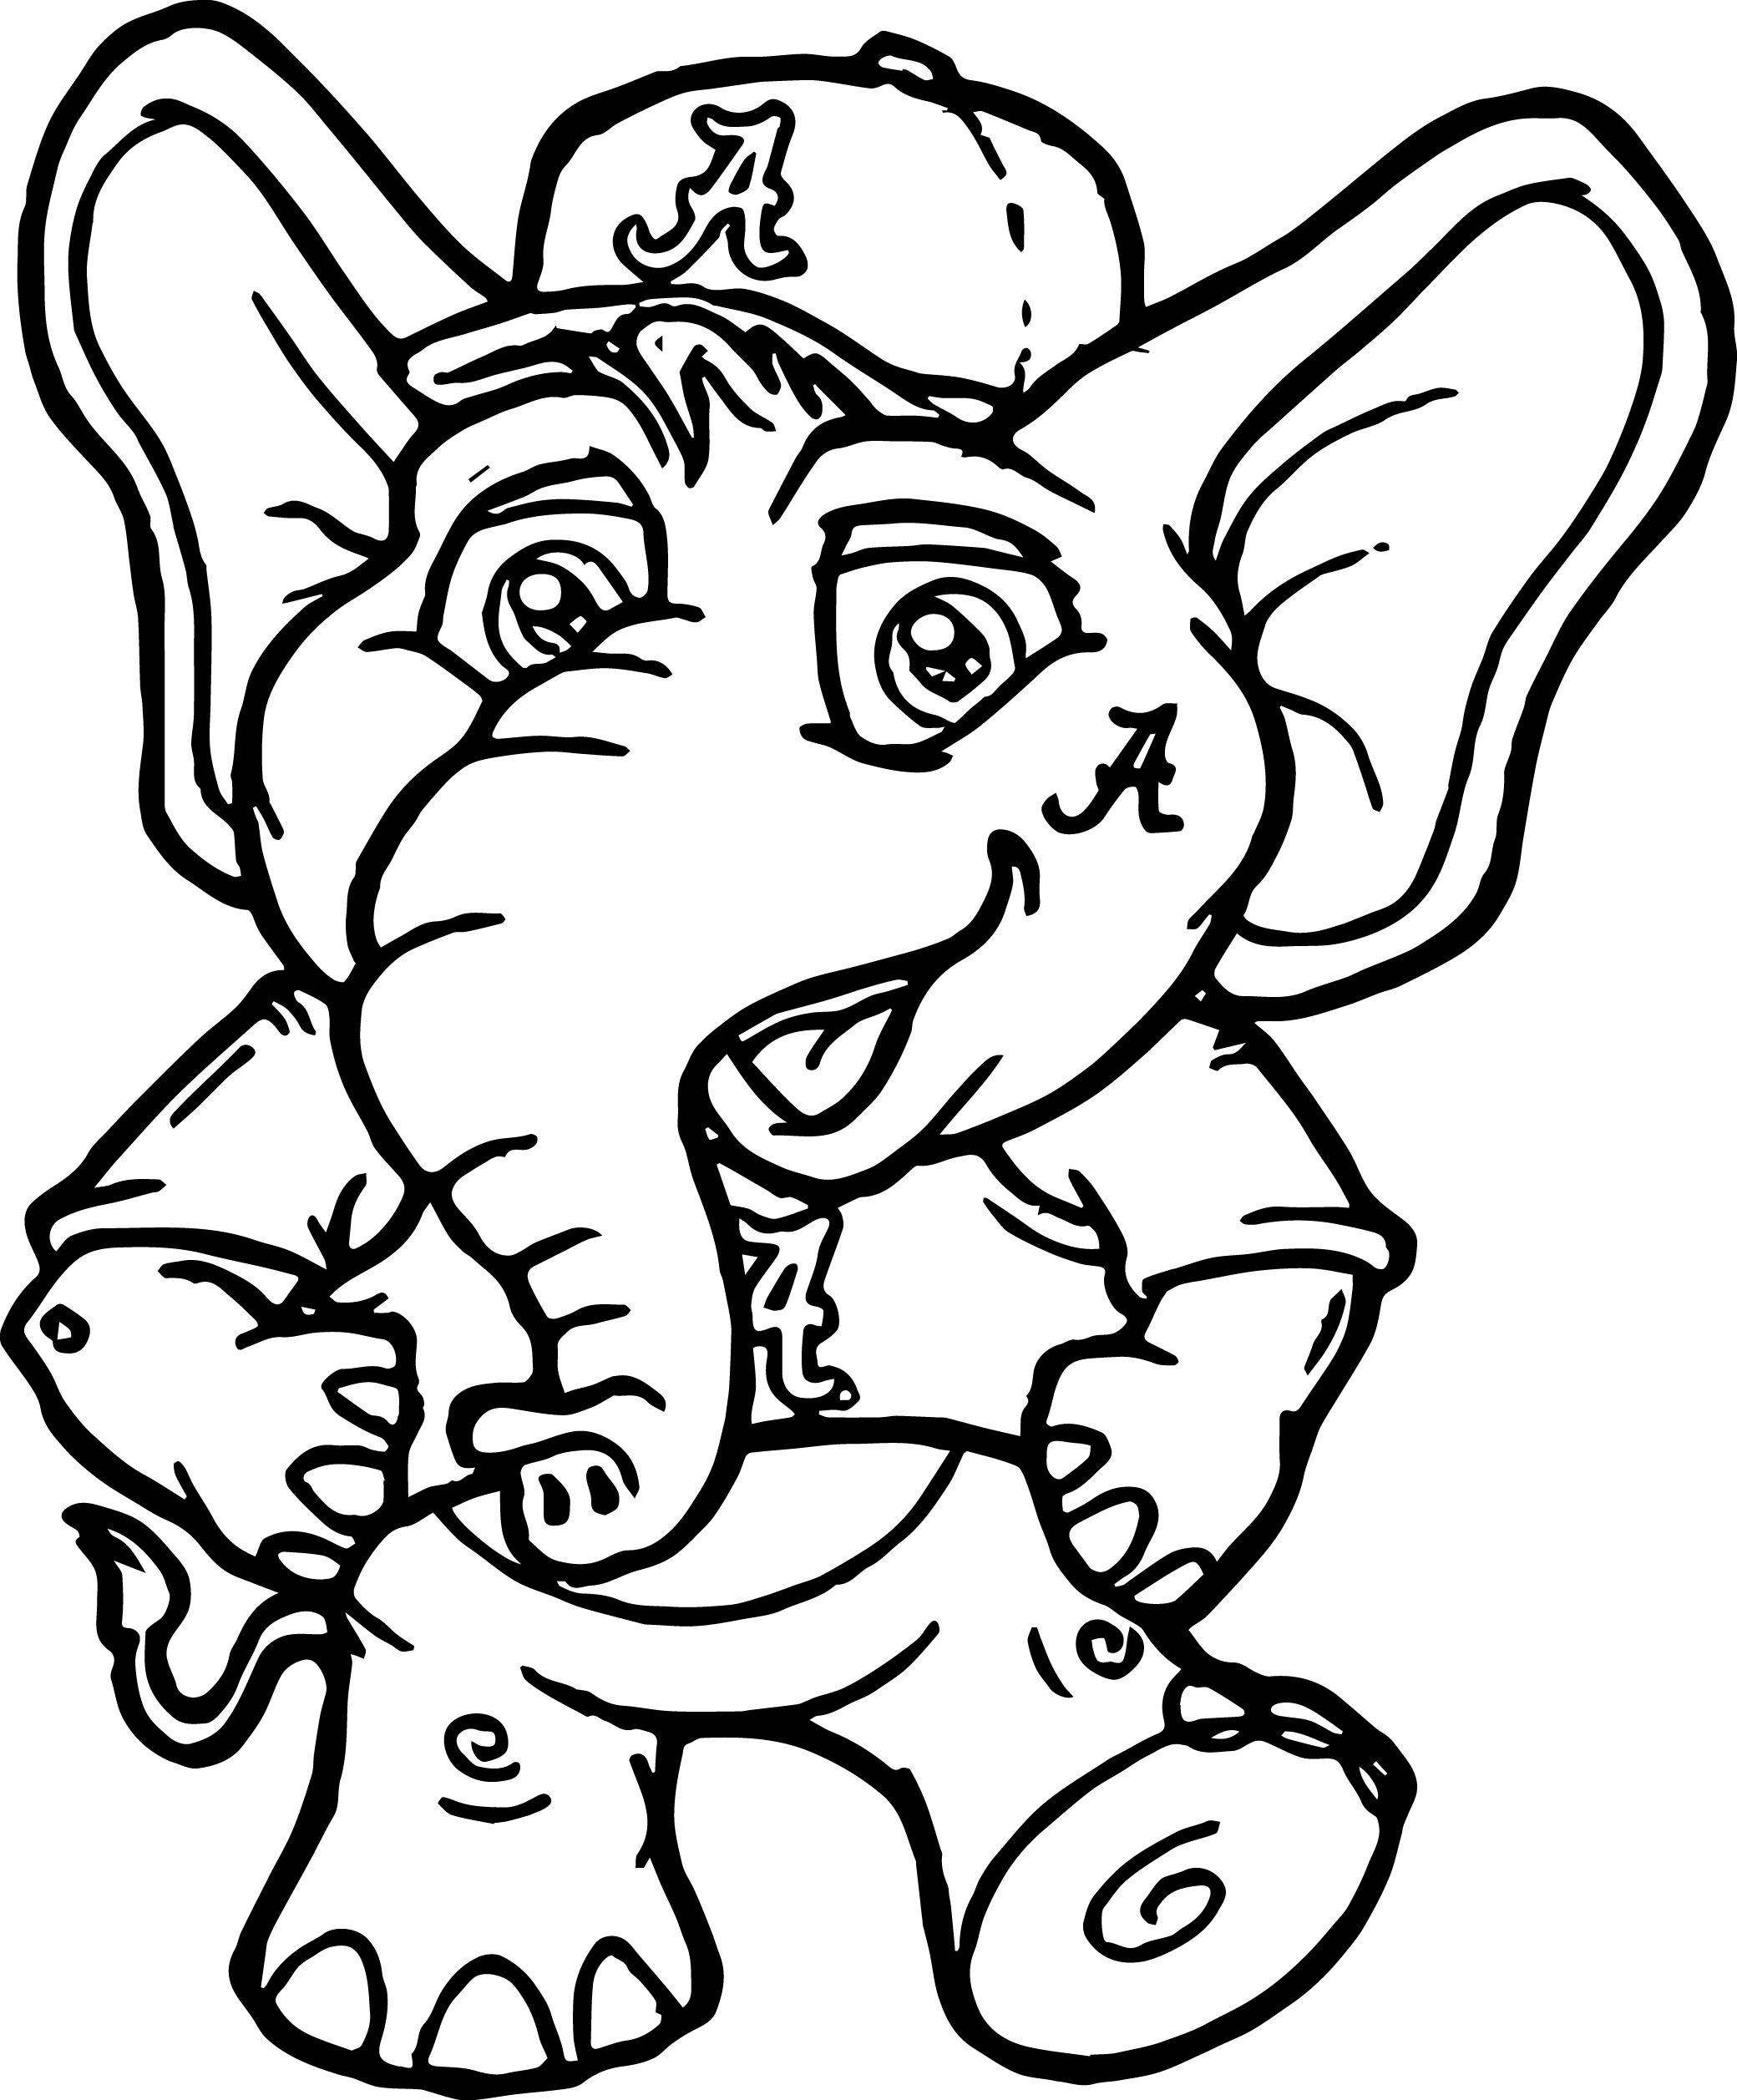 Coloring Pages Of Alabama Football.